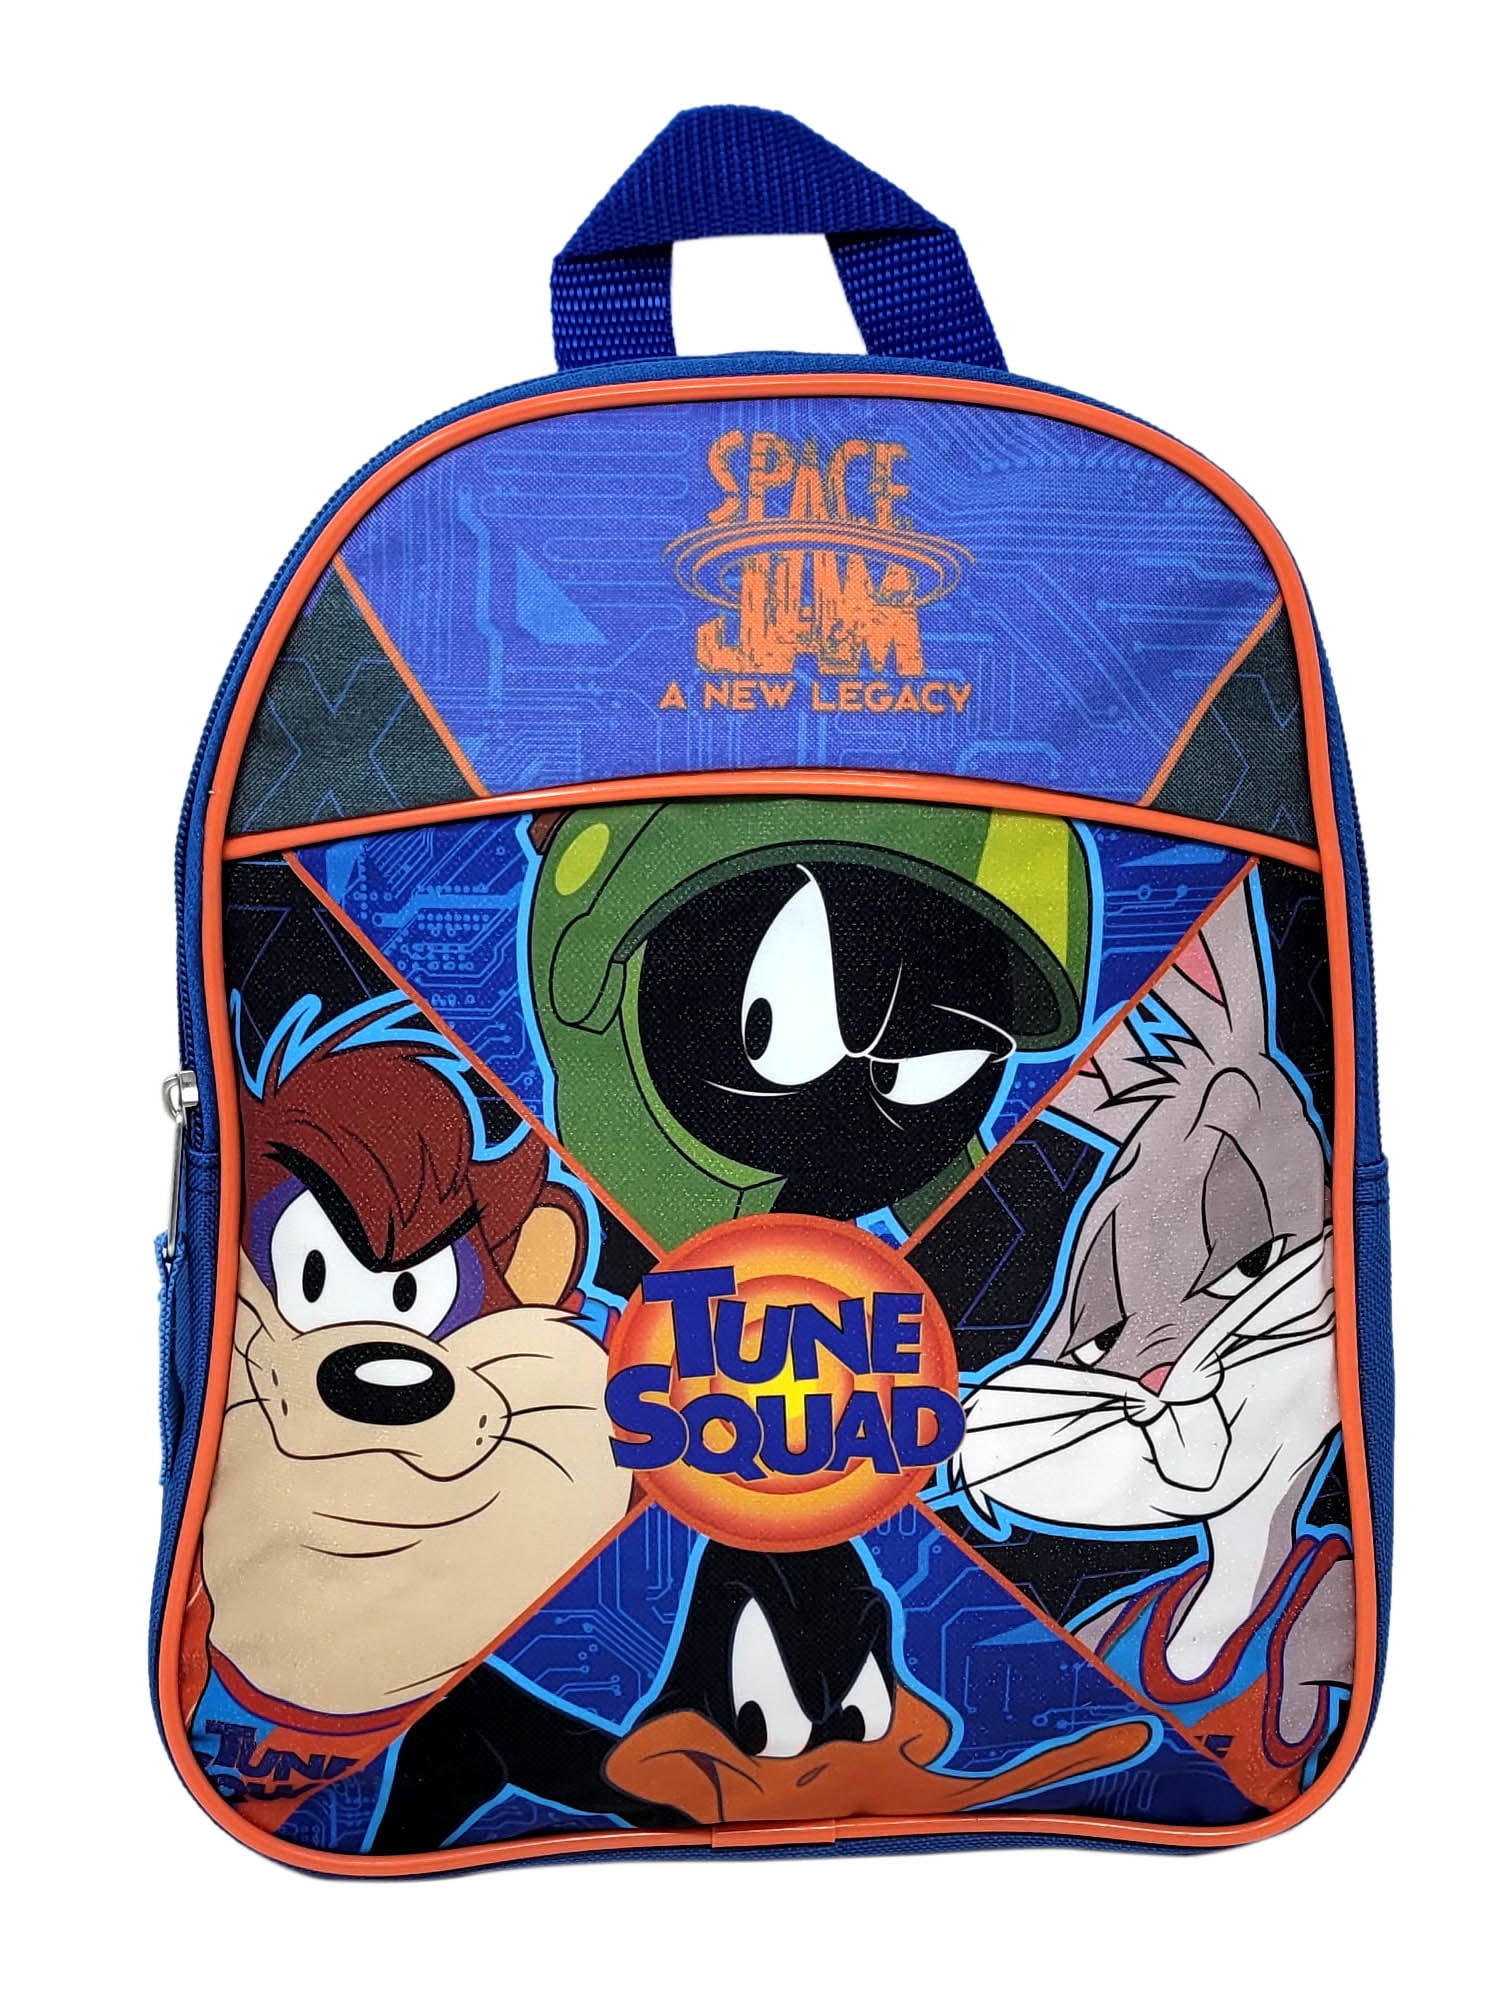 Space Jam Lola Bunny Backpack Looney Tune Squad School Book Bag Tote 17" 